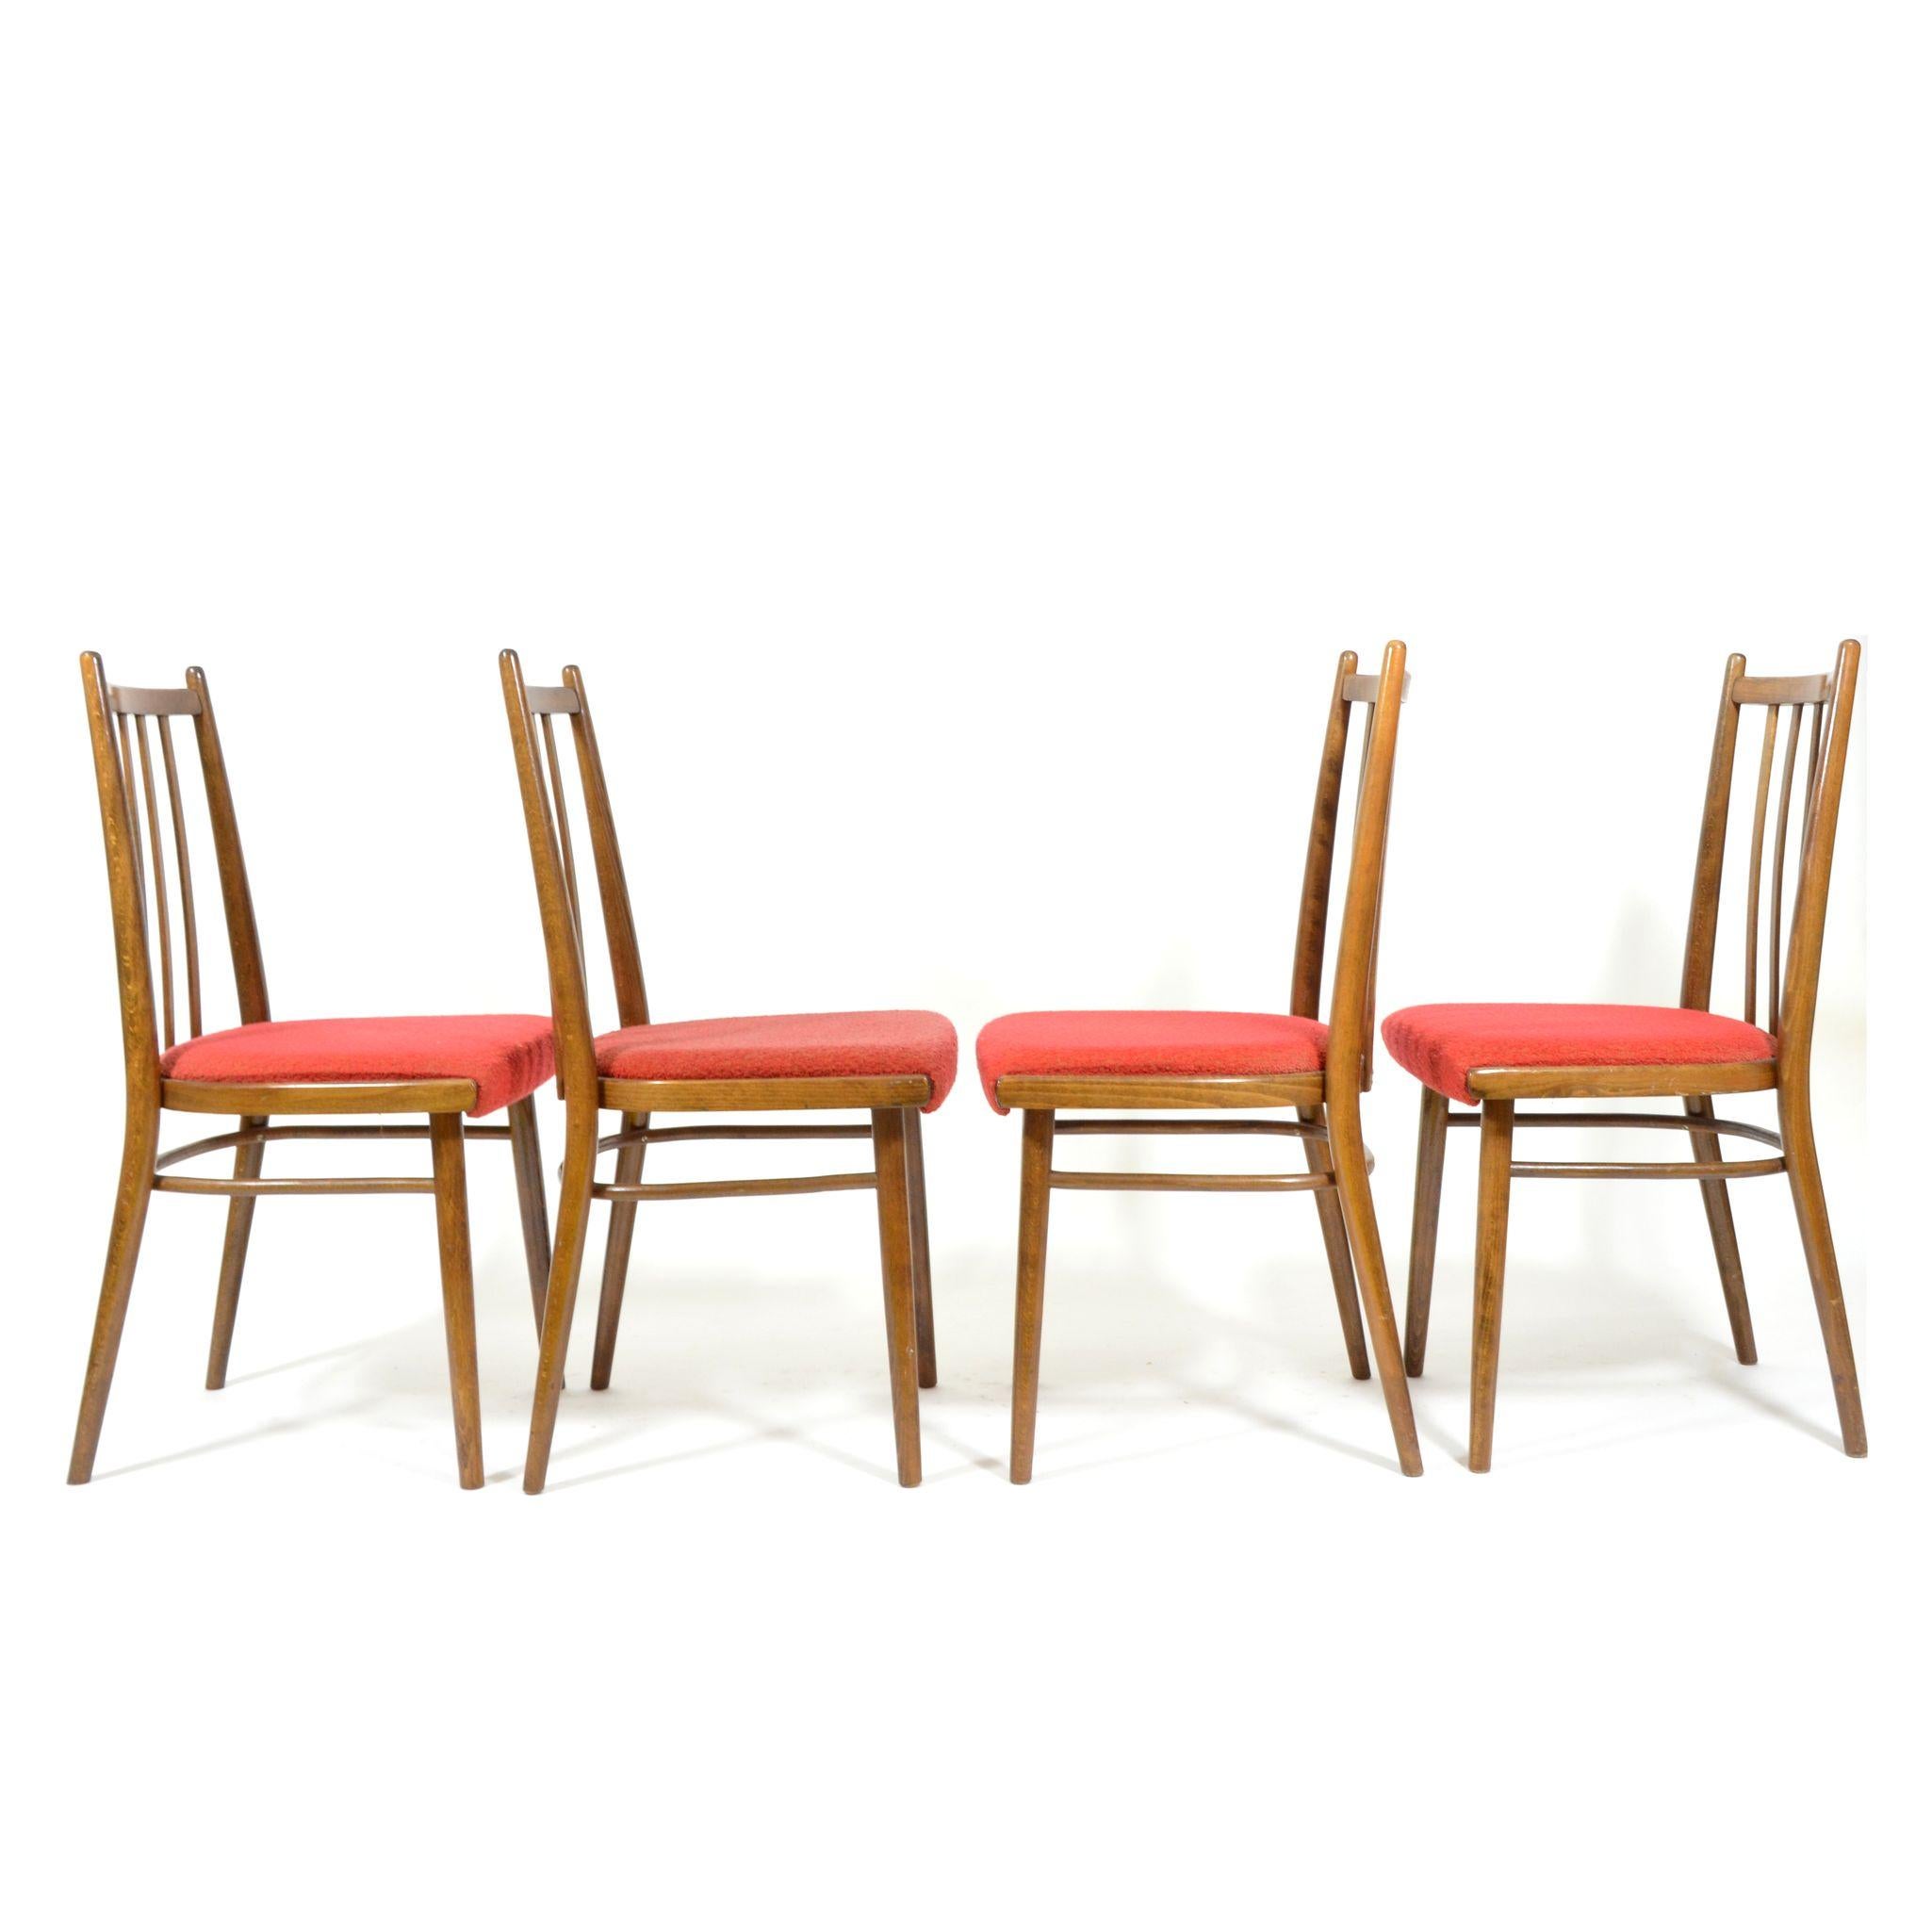 Set of Four Vintage Dining Chairs, Red Upholstered, Czechoslovakia, 1970s In Good Condition For Sale In Zbiroh, CZ